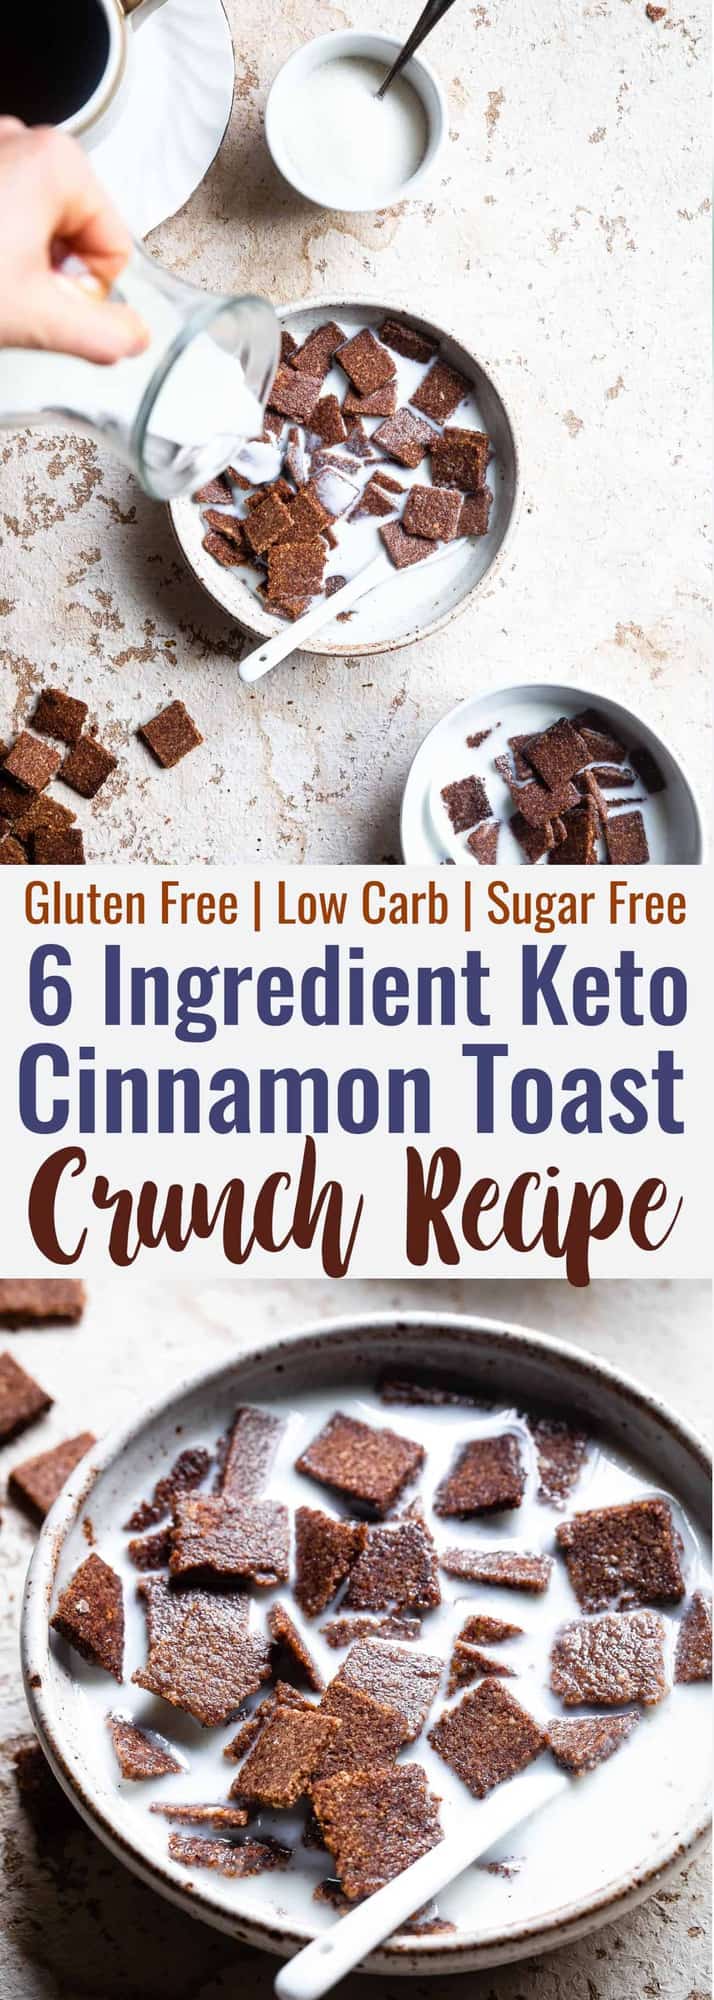 Cinnamon Homemade Keto Low Carb Cereal - This easy, paleo friendly Homemade Cereal tastes like cinnamon toast crunch but its gluten/grain/dairy/sugar free and healthy! Only 6 ingredients too! | #Foodfaithfitness | #Glutenfree #paleo #keto #lowcarb #sugarfree